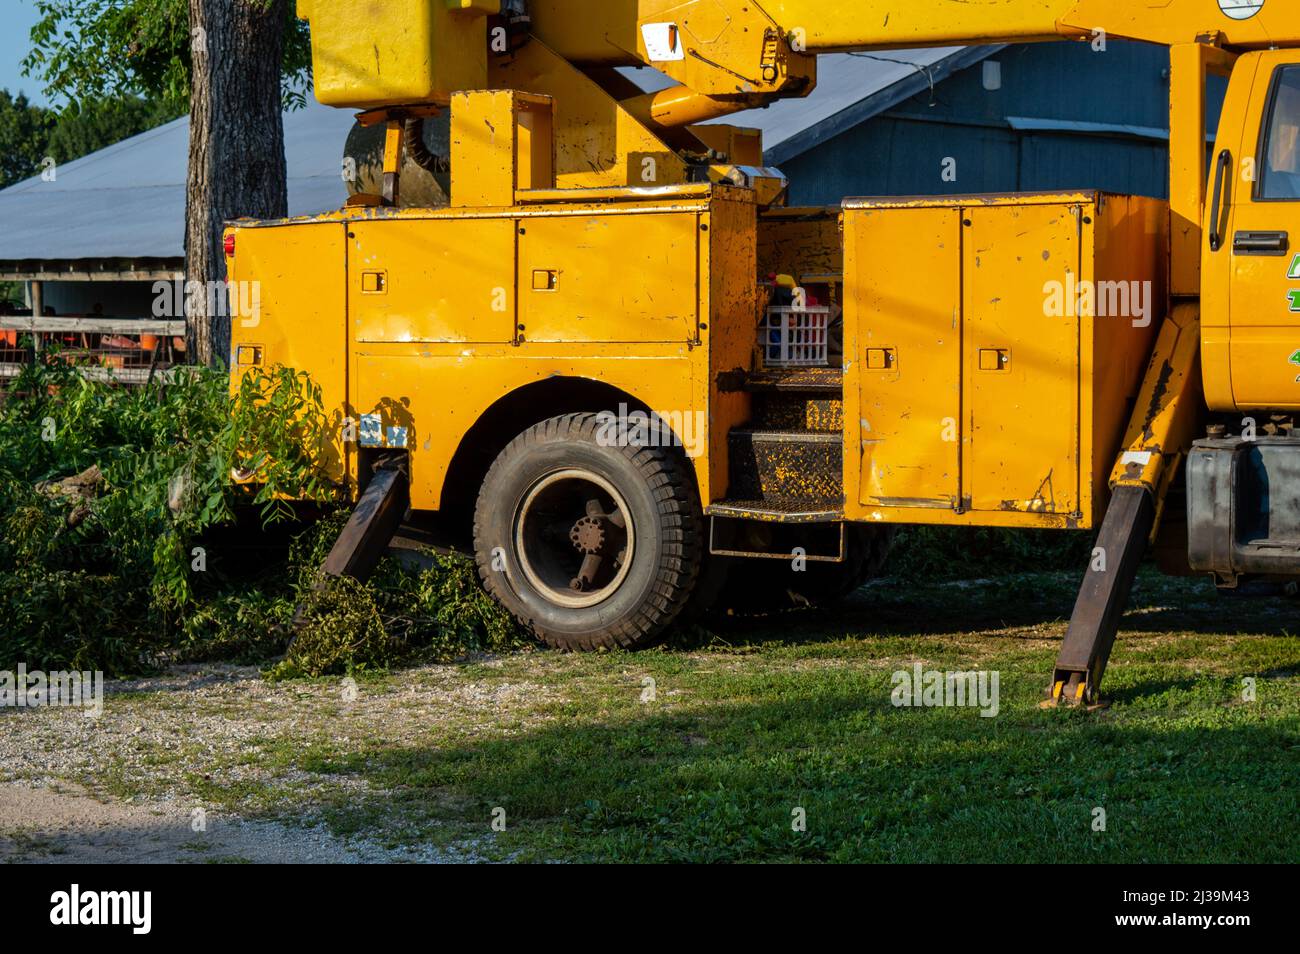 A utility bucket truck is essential when it is time to cut down a old and dying tree from a residential yard. A professional is a must. Stock Photo